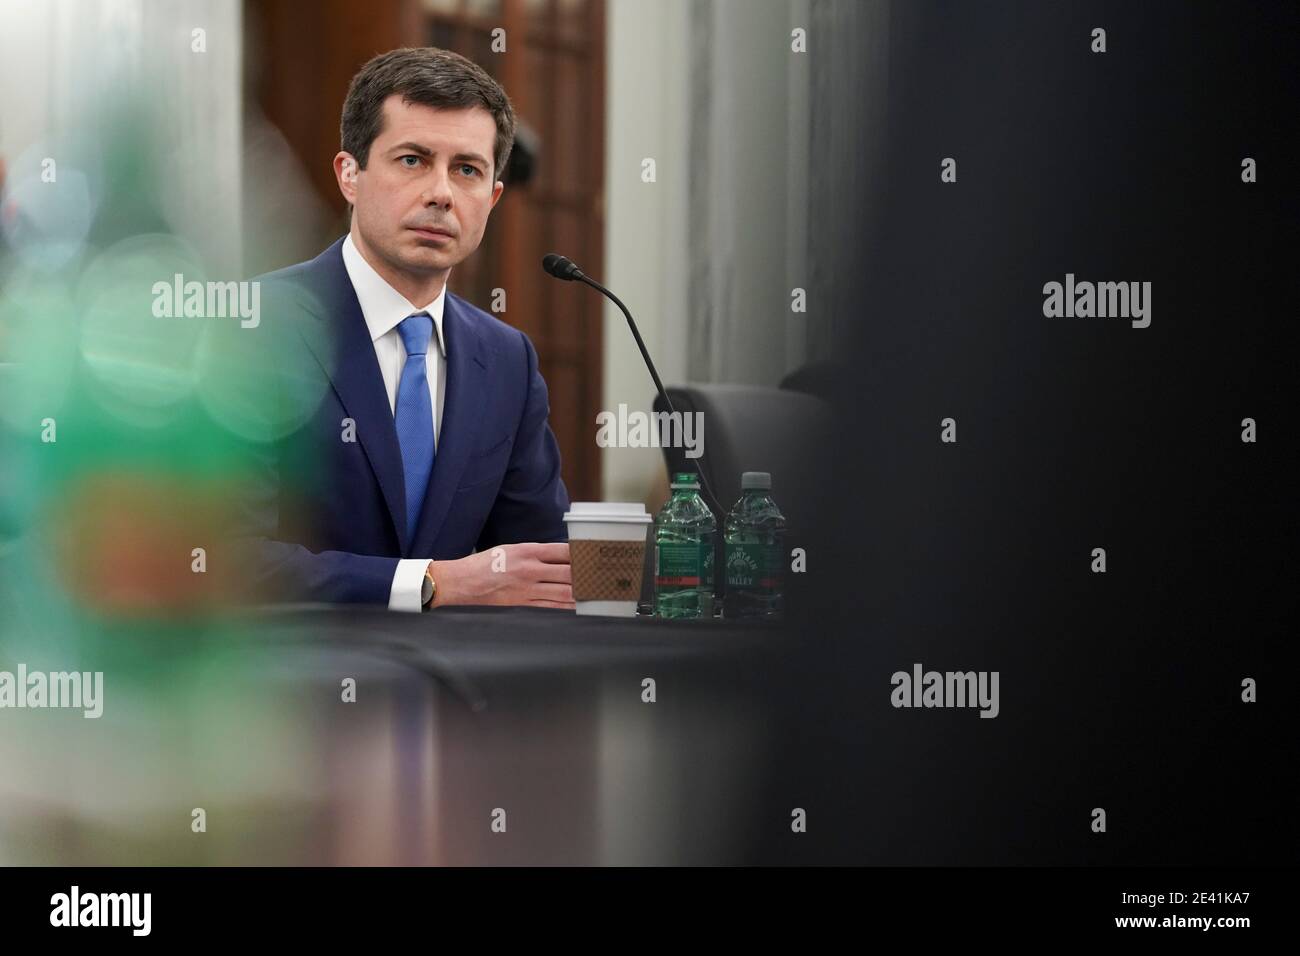 Washington, DC, USA. 21st Jan, 2021. Pete Buttigieg, U.S. secretary of transportation nominee for U.S. President Joe Biden, listens during a Senate Commerce, Science and Transportation Committee confirmation hearing in Washington, DC, U.S., on Thursday, Jan. 21, 2021. Buttigieg, is pledging to carry out the administration's ambitious agenda to rebuild the nation's infrastructure, calling it a 'generational opportunity' to create new jobs, fight economic inequality and stem climate change. Credit: Stefani Reynolds/Pool via CNP | usage worldwide Credit: dpa/Alamy Live News Stock Photo